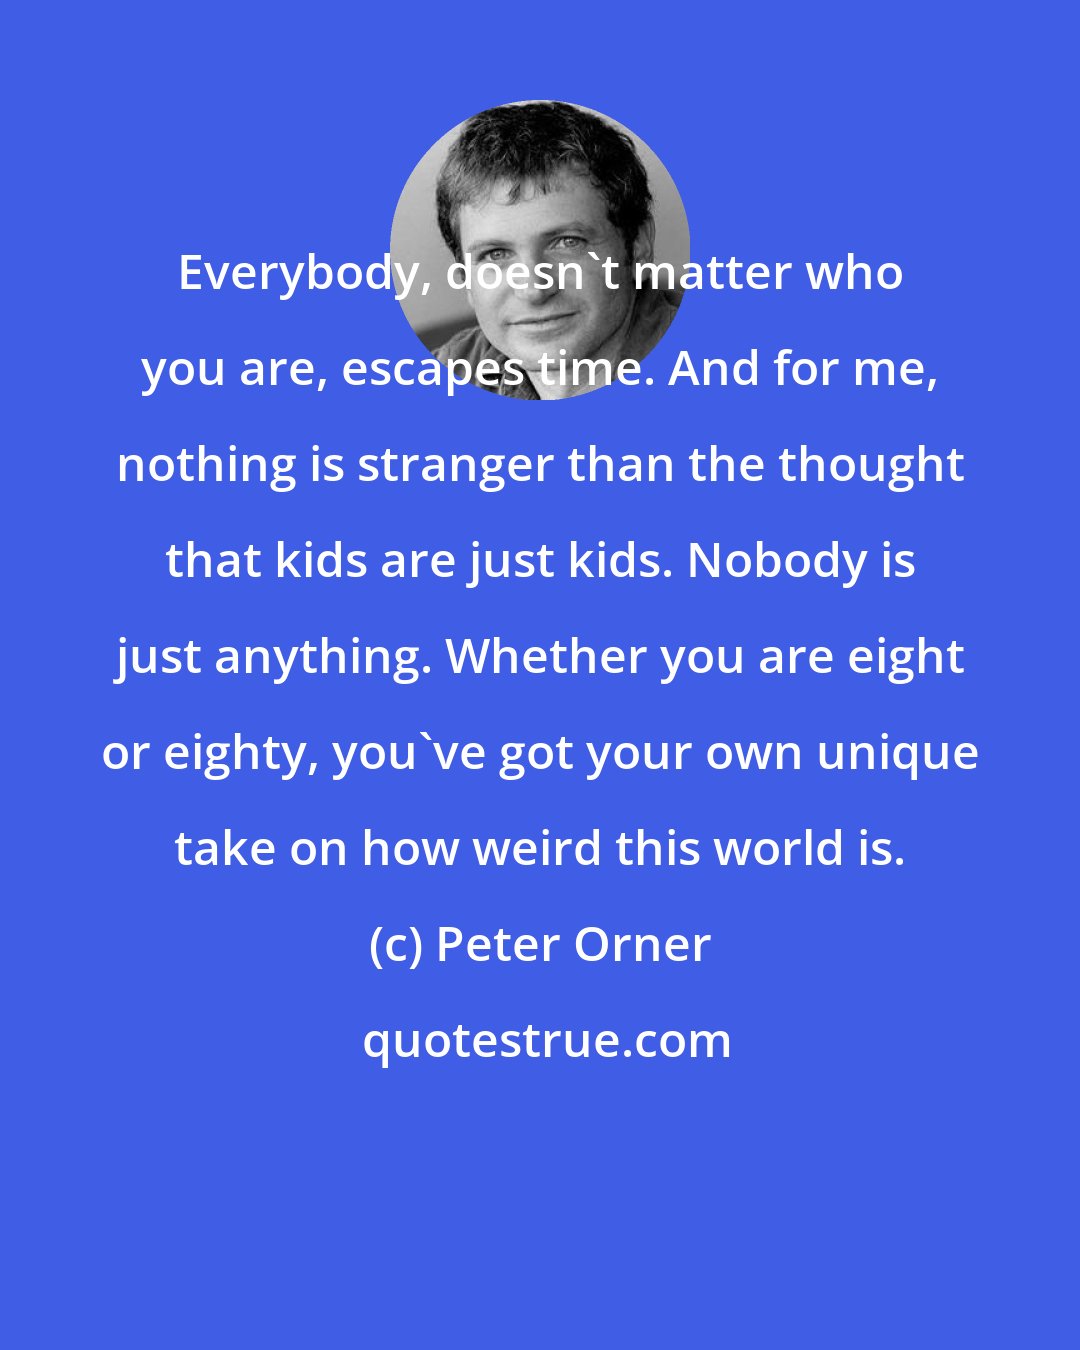 Peter Orner: Everybody, doesn't matter who you are, escapes time. And for me, nothing is stranger than the thought that kids are just kids. Nobody is just anything. Whether you are eight or eighty, you've got your own unique take on how weird this world is.